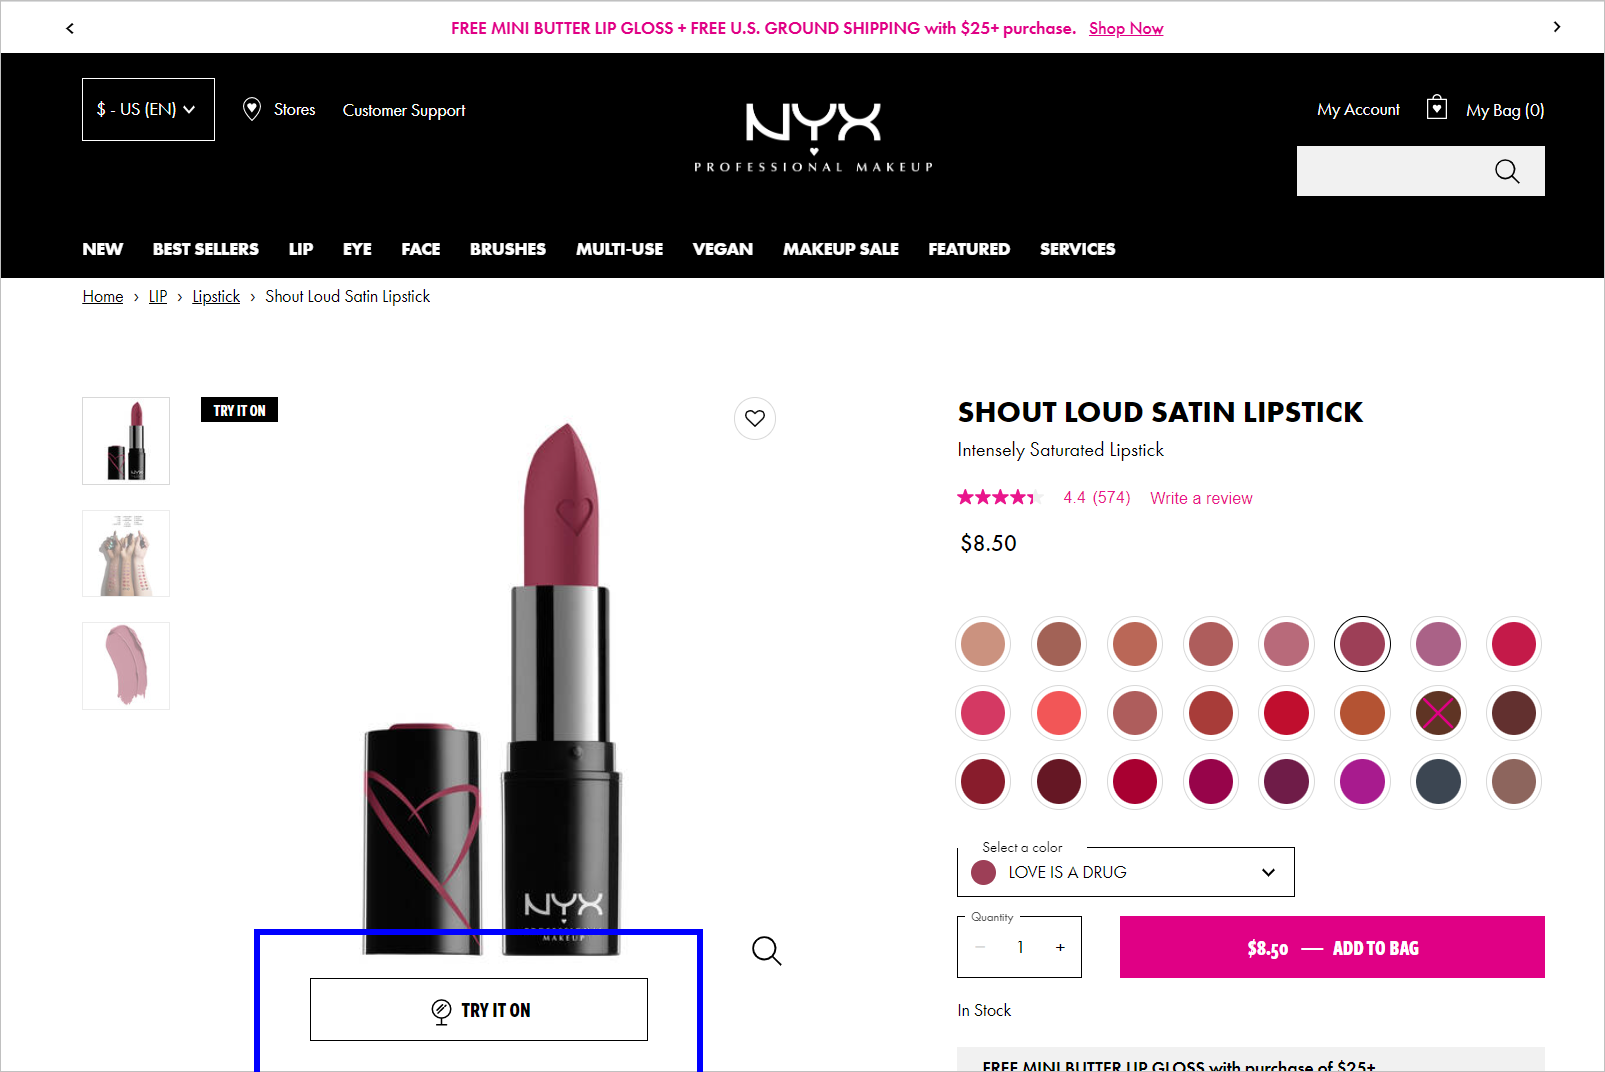 Lipstick product mages on the left and product details on the right including star ratings, colors available, and CTA button